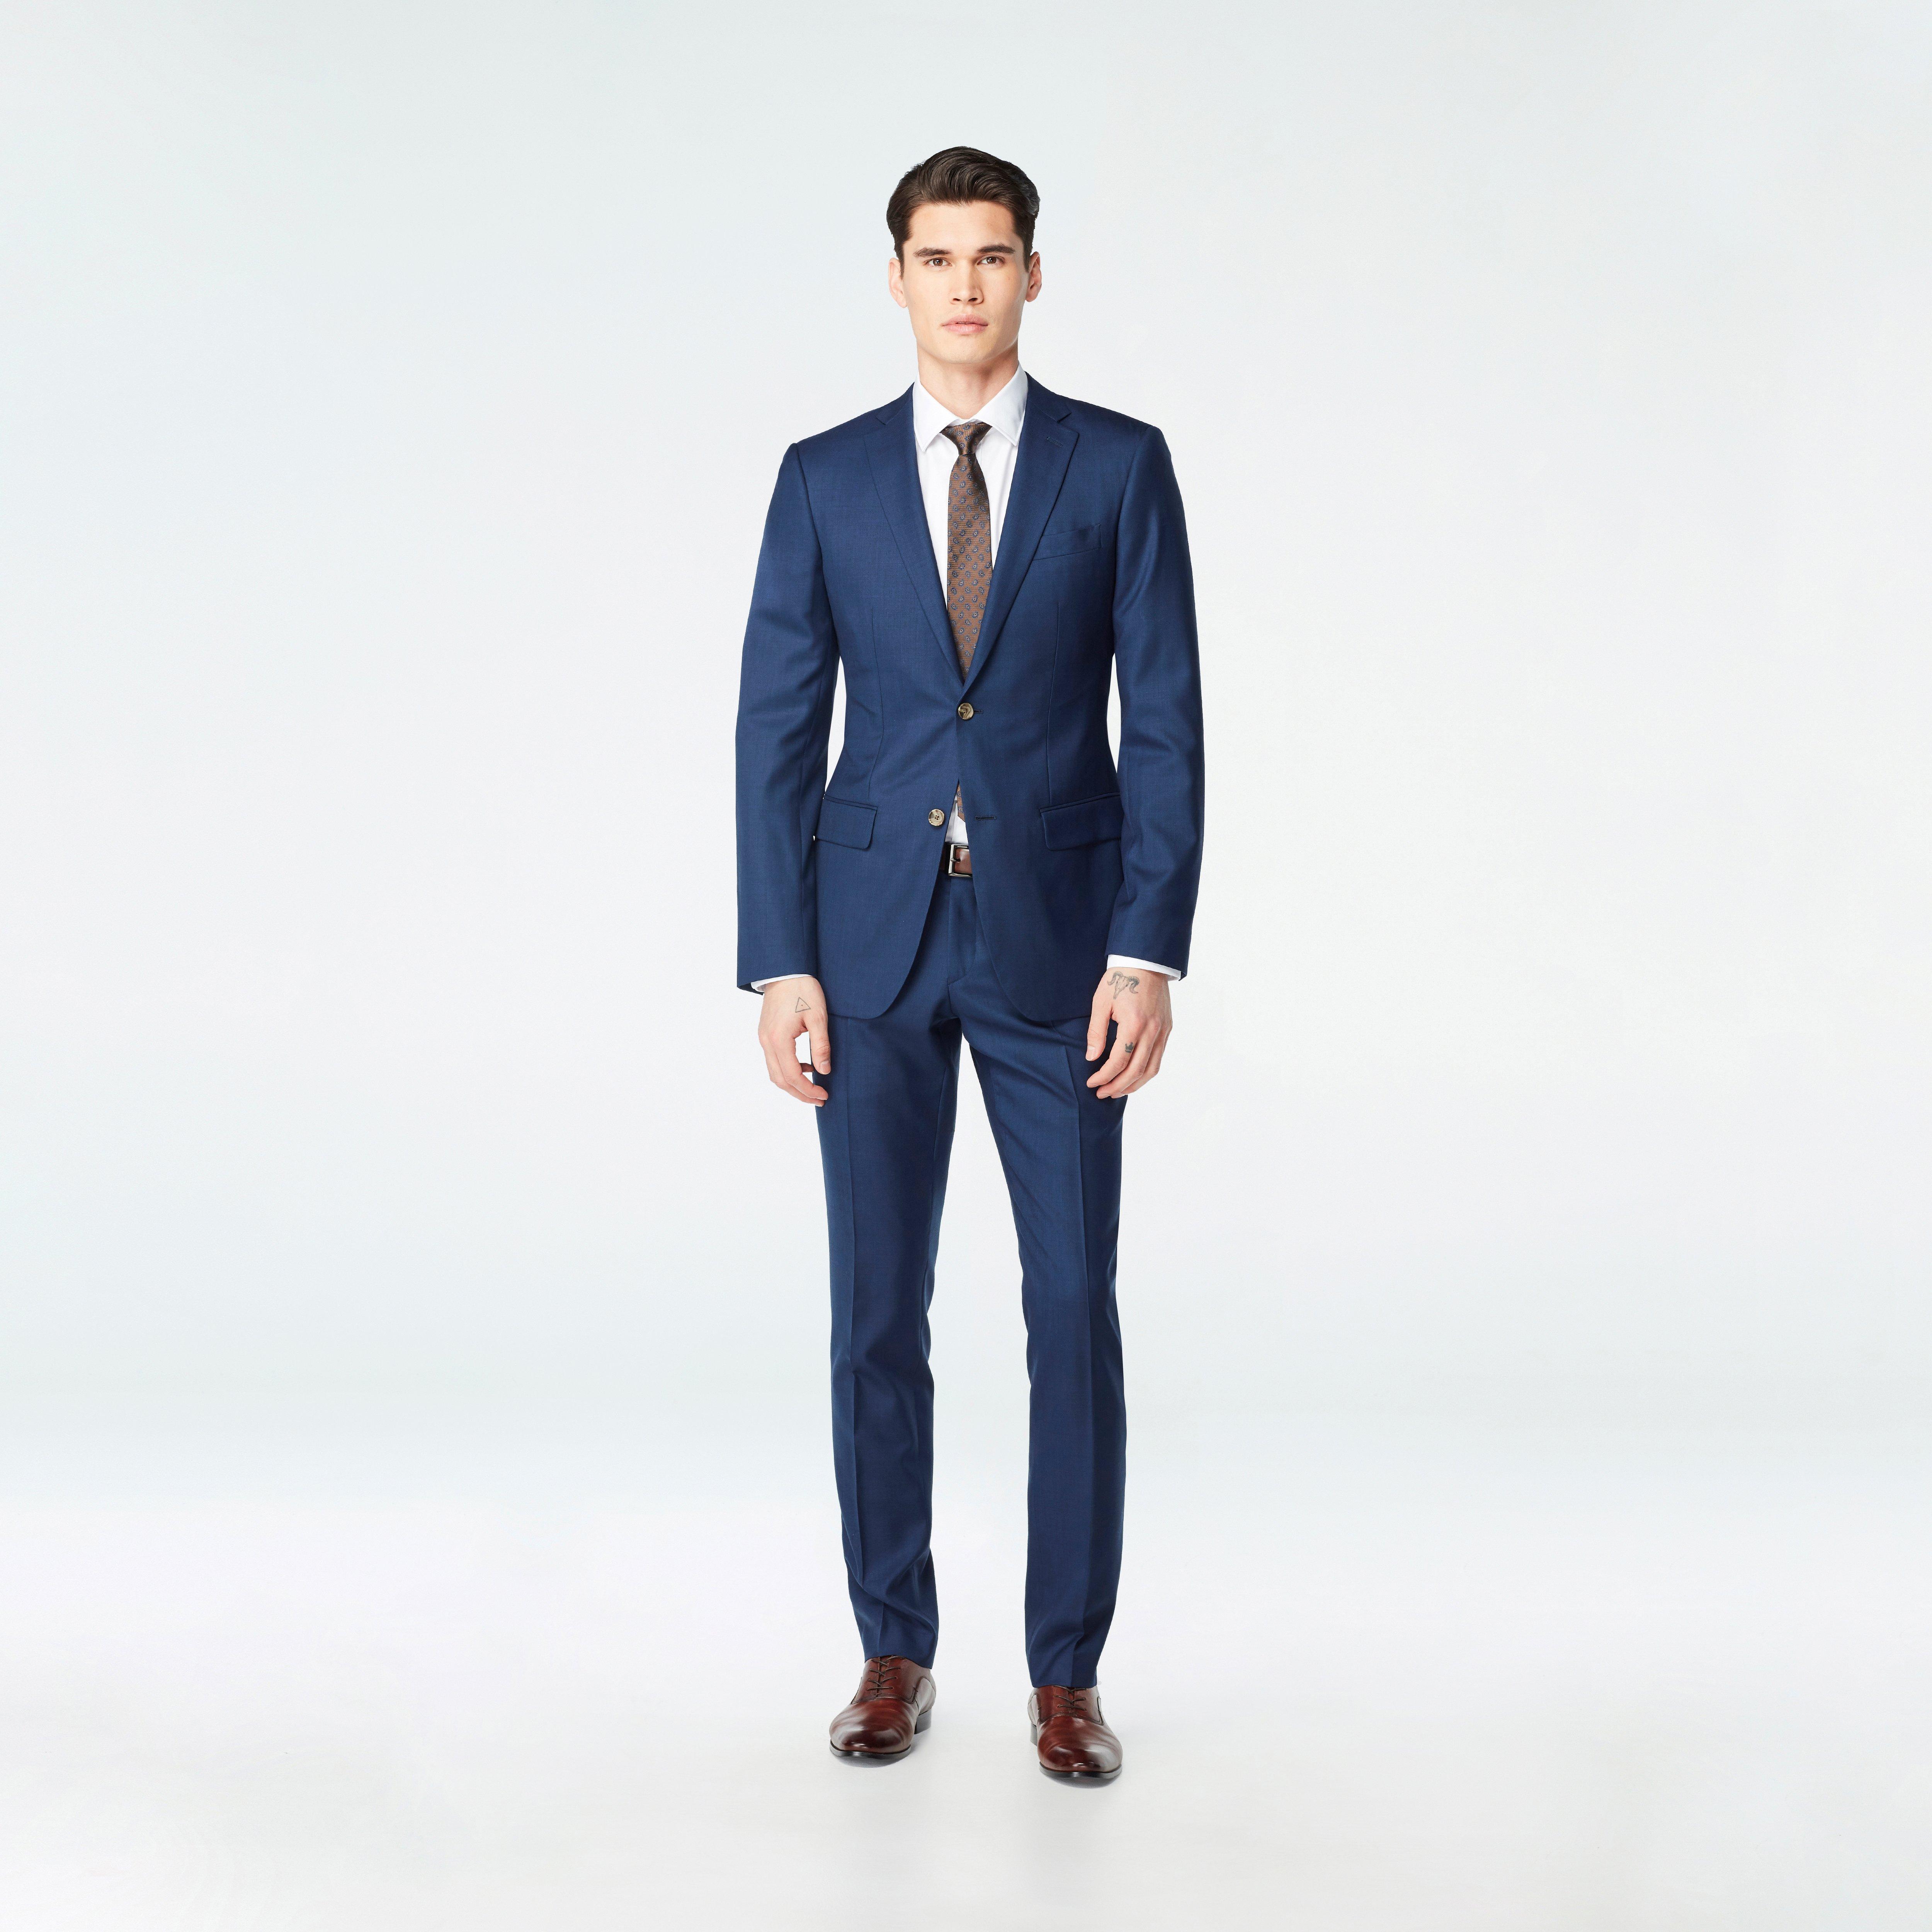 Custom Suits Made For You - Hayle Sharkskin Dark Navy Suit | INDOCHINO